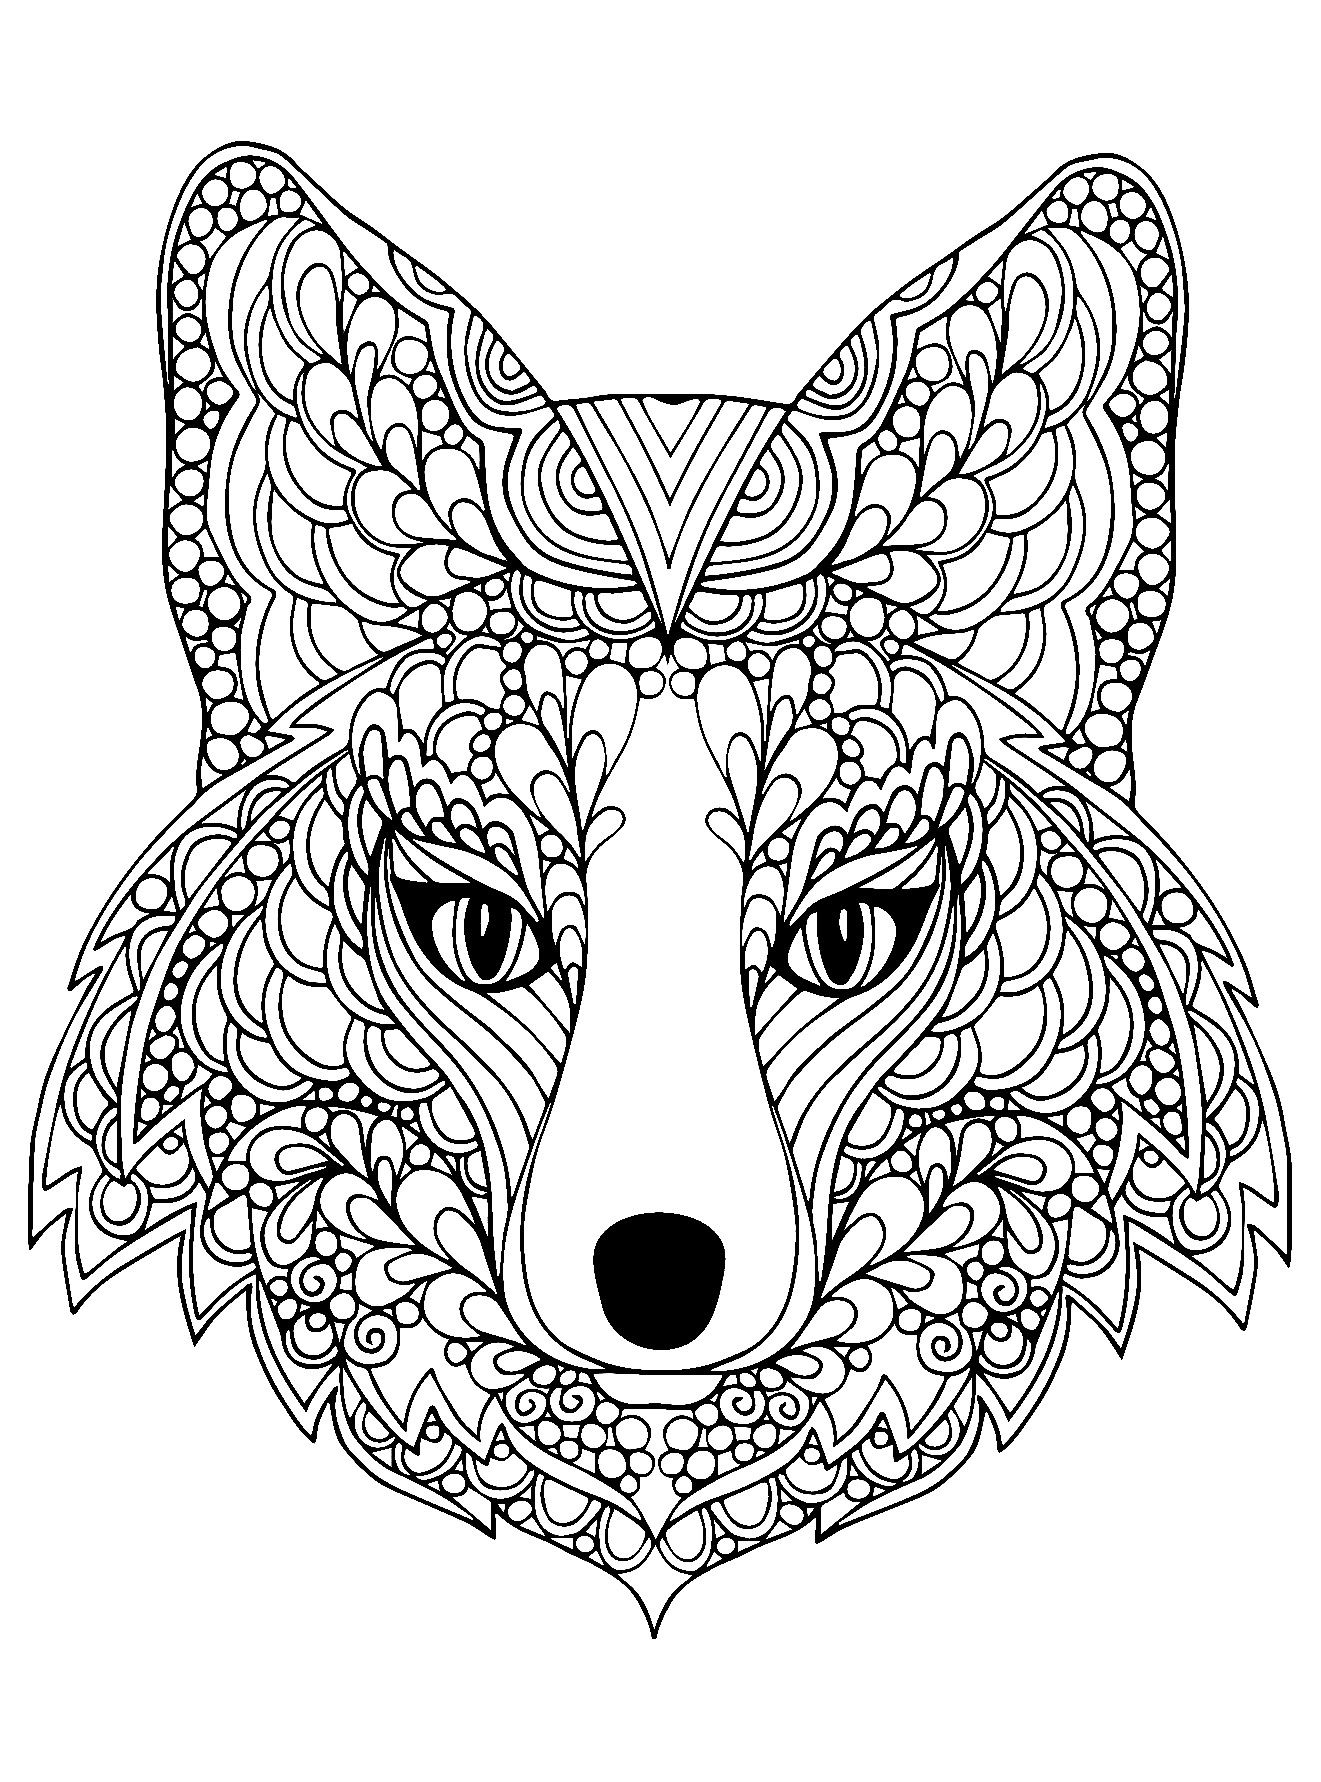 Teacup Coloring Pages Printable at GetColorings.com | Free ...